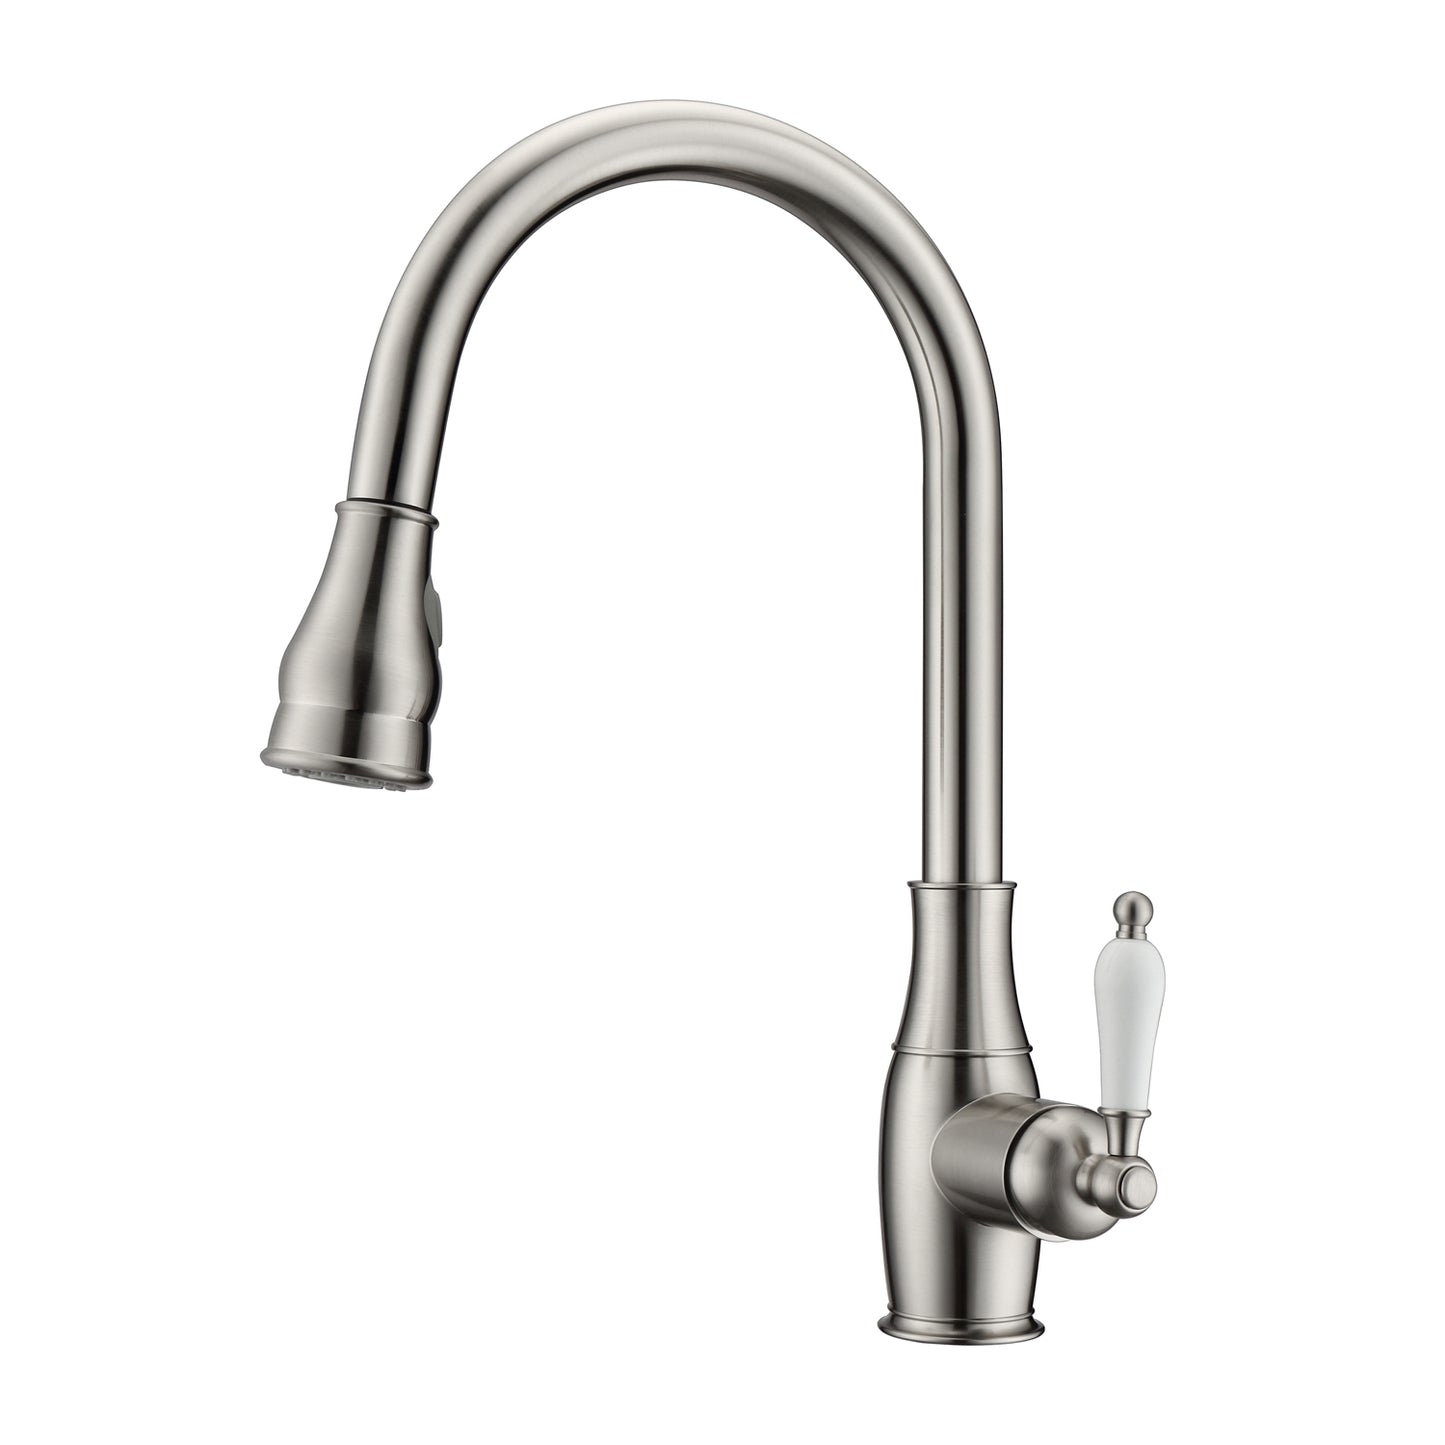 Caryl Kitchen Faucet, Pull-Out Sprayer, Single Porcelain Lever Handle, Brushed Nickel